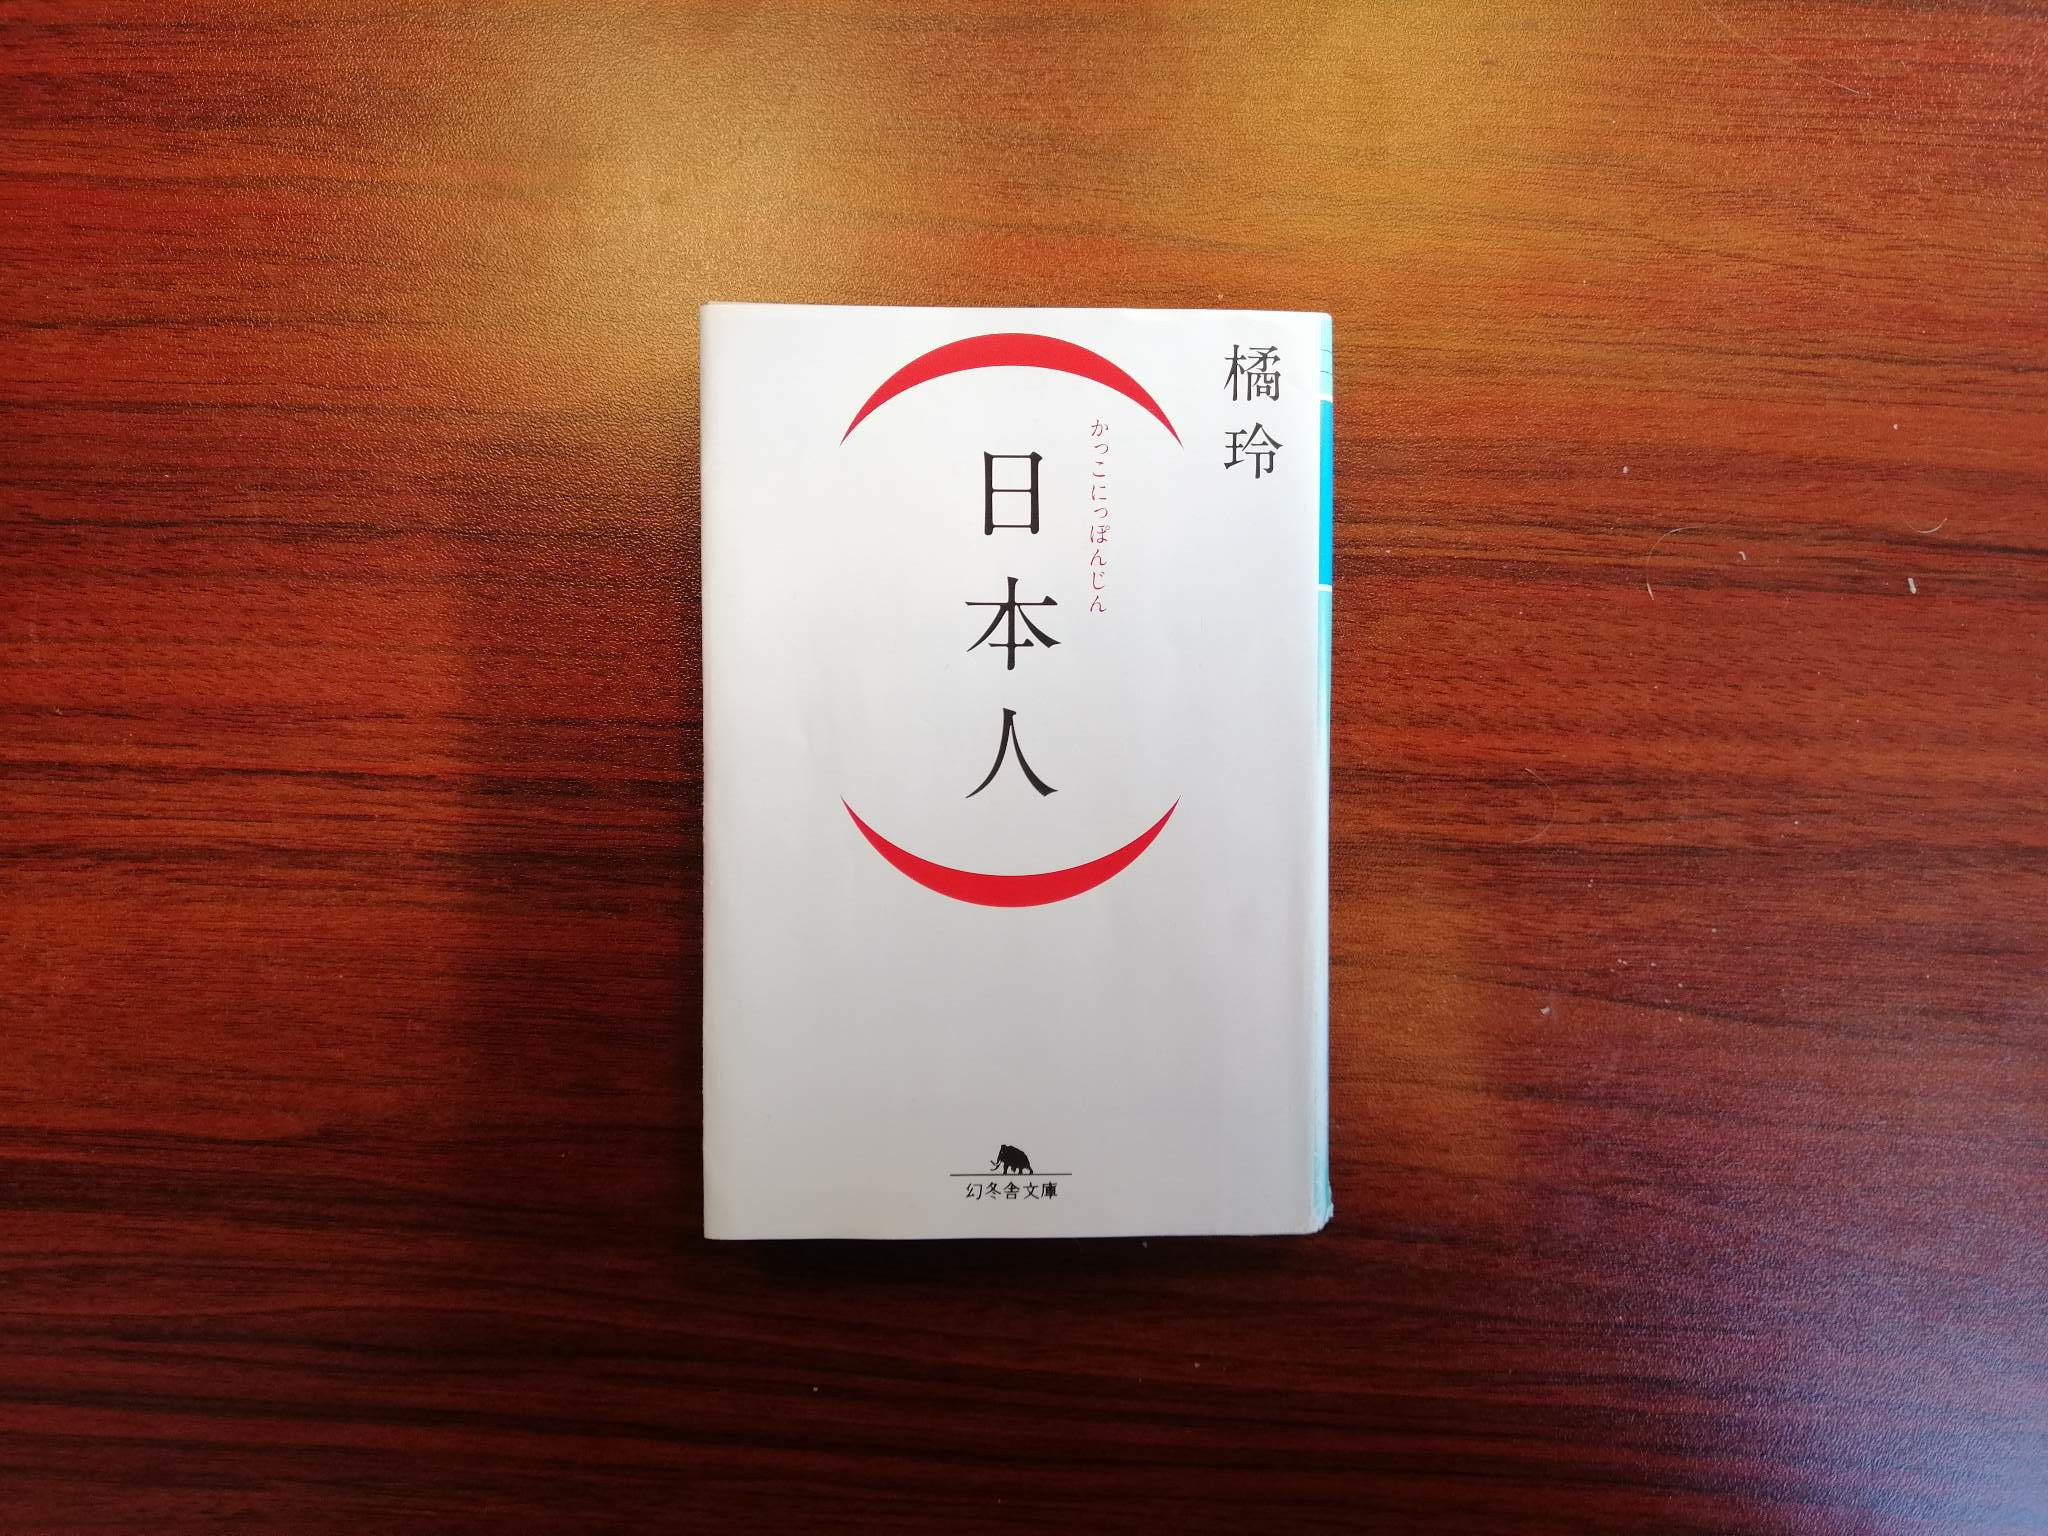 picture of the book 'Japanese people'